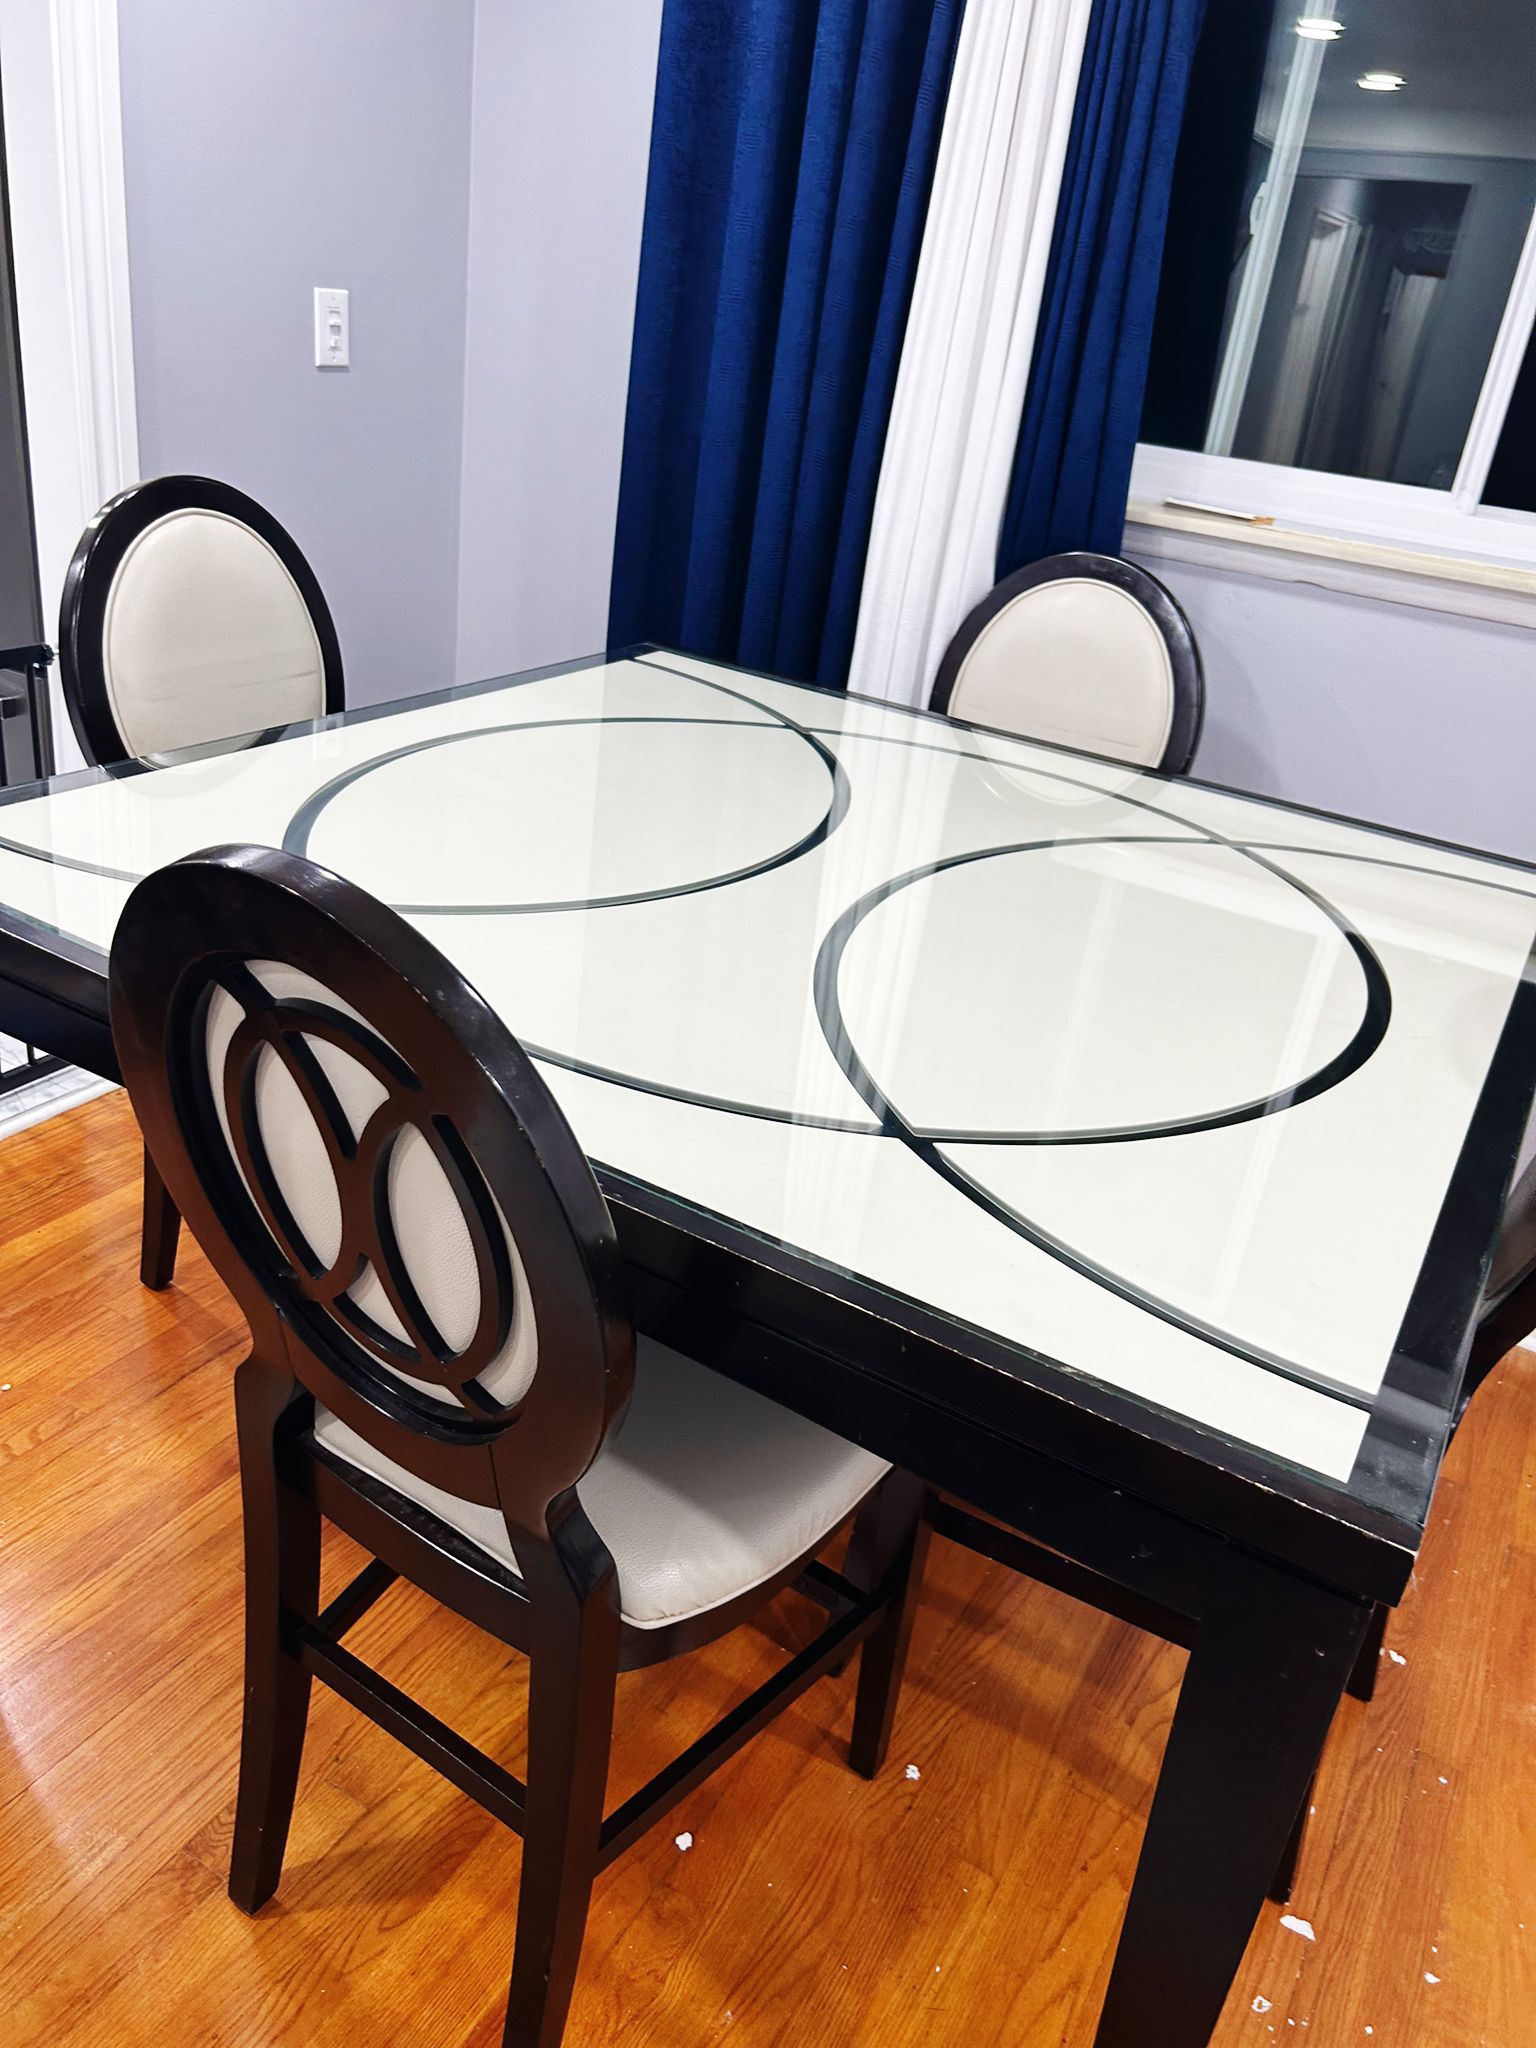 White & Black dining table With 4 Chairs 